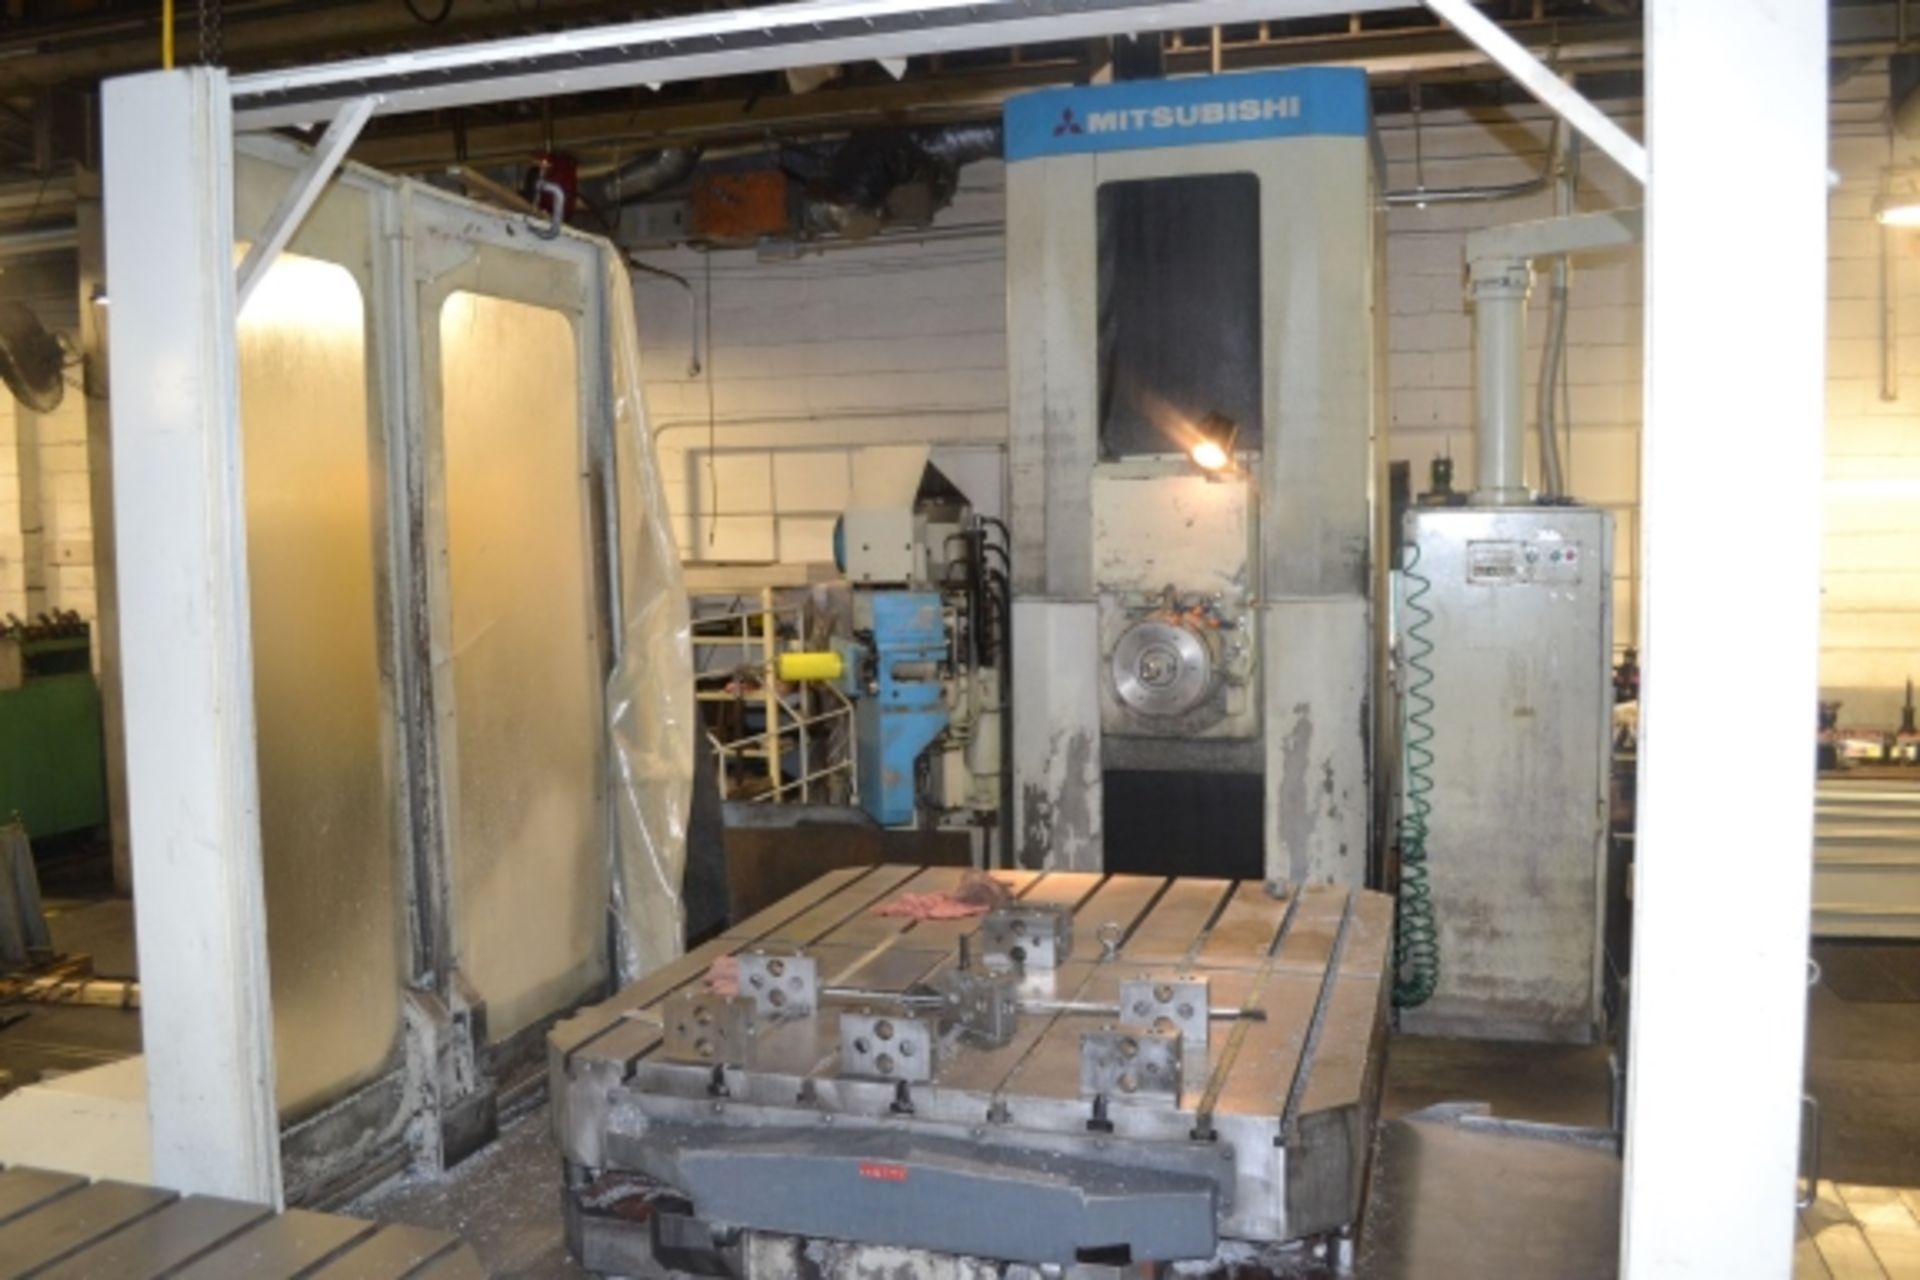 4.33" Mitsubishi MHT 11/1416 CNC Table Type Horizontal Boring Mill with Pallet Shuttle - Image 2 of 11